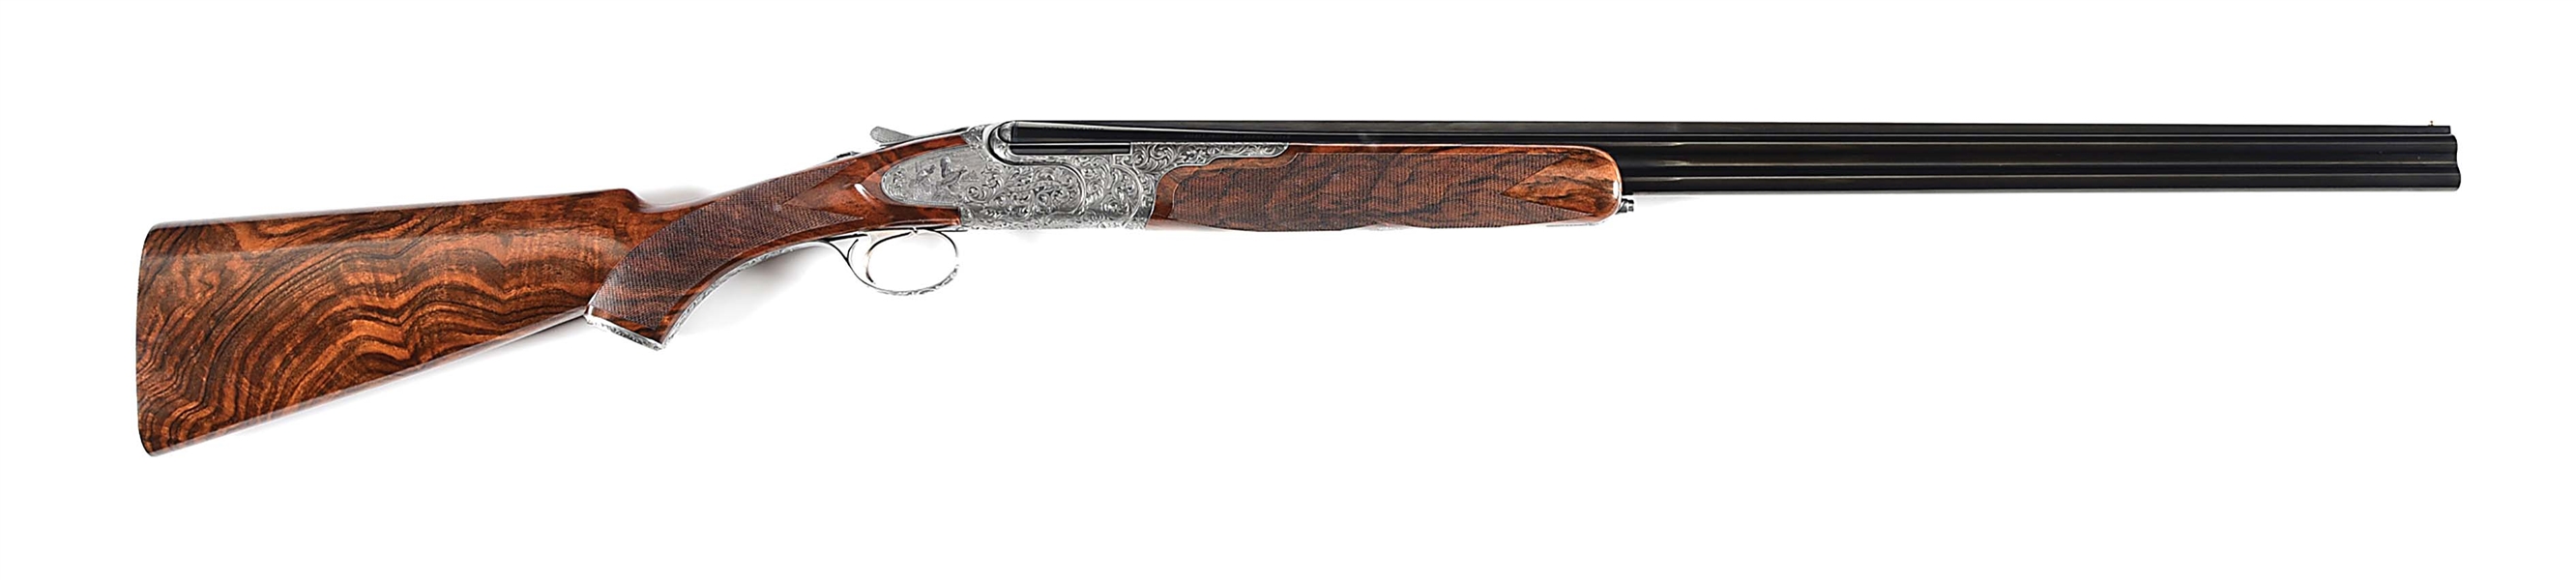 (M) RIZZINI 32 GAUGE OVER UNDER QUAIL GUN BUILT FOR GORDY & SONS AND ENGRAVED BY BOTTEGA GIOVANELLI.